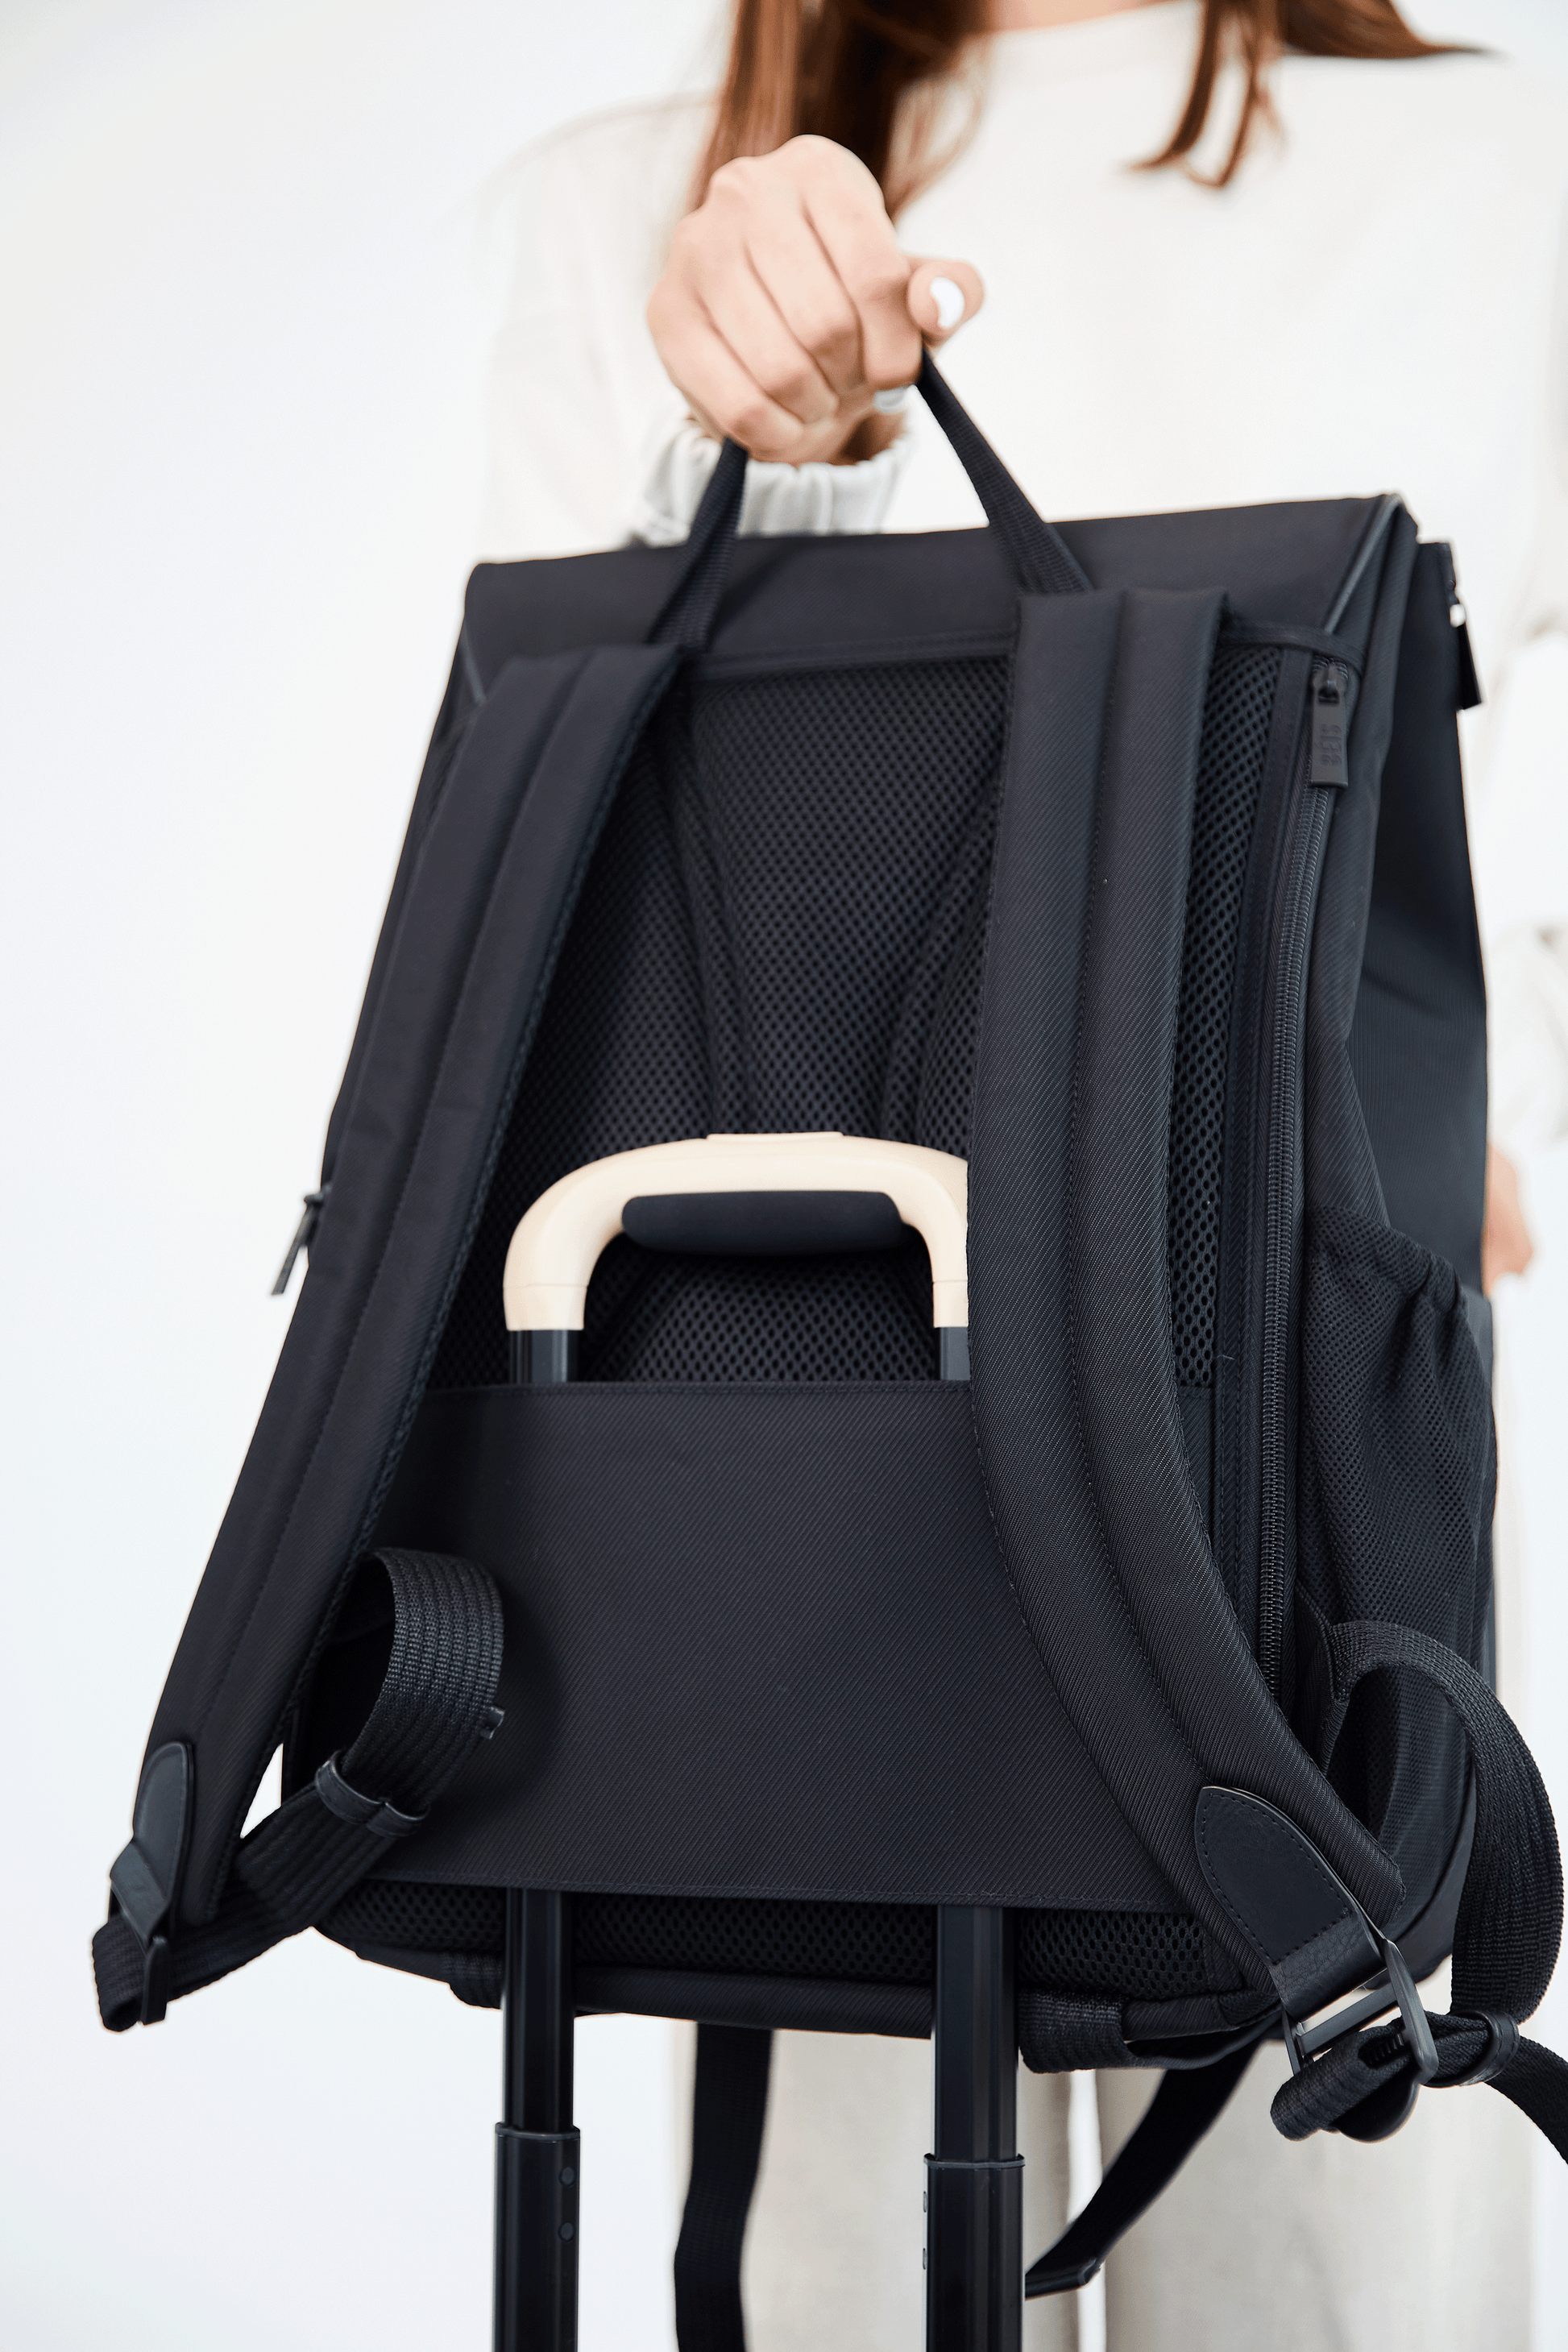 Hanging Backpack Black Trolley Passthrough